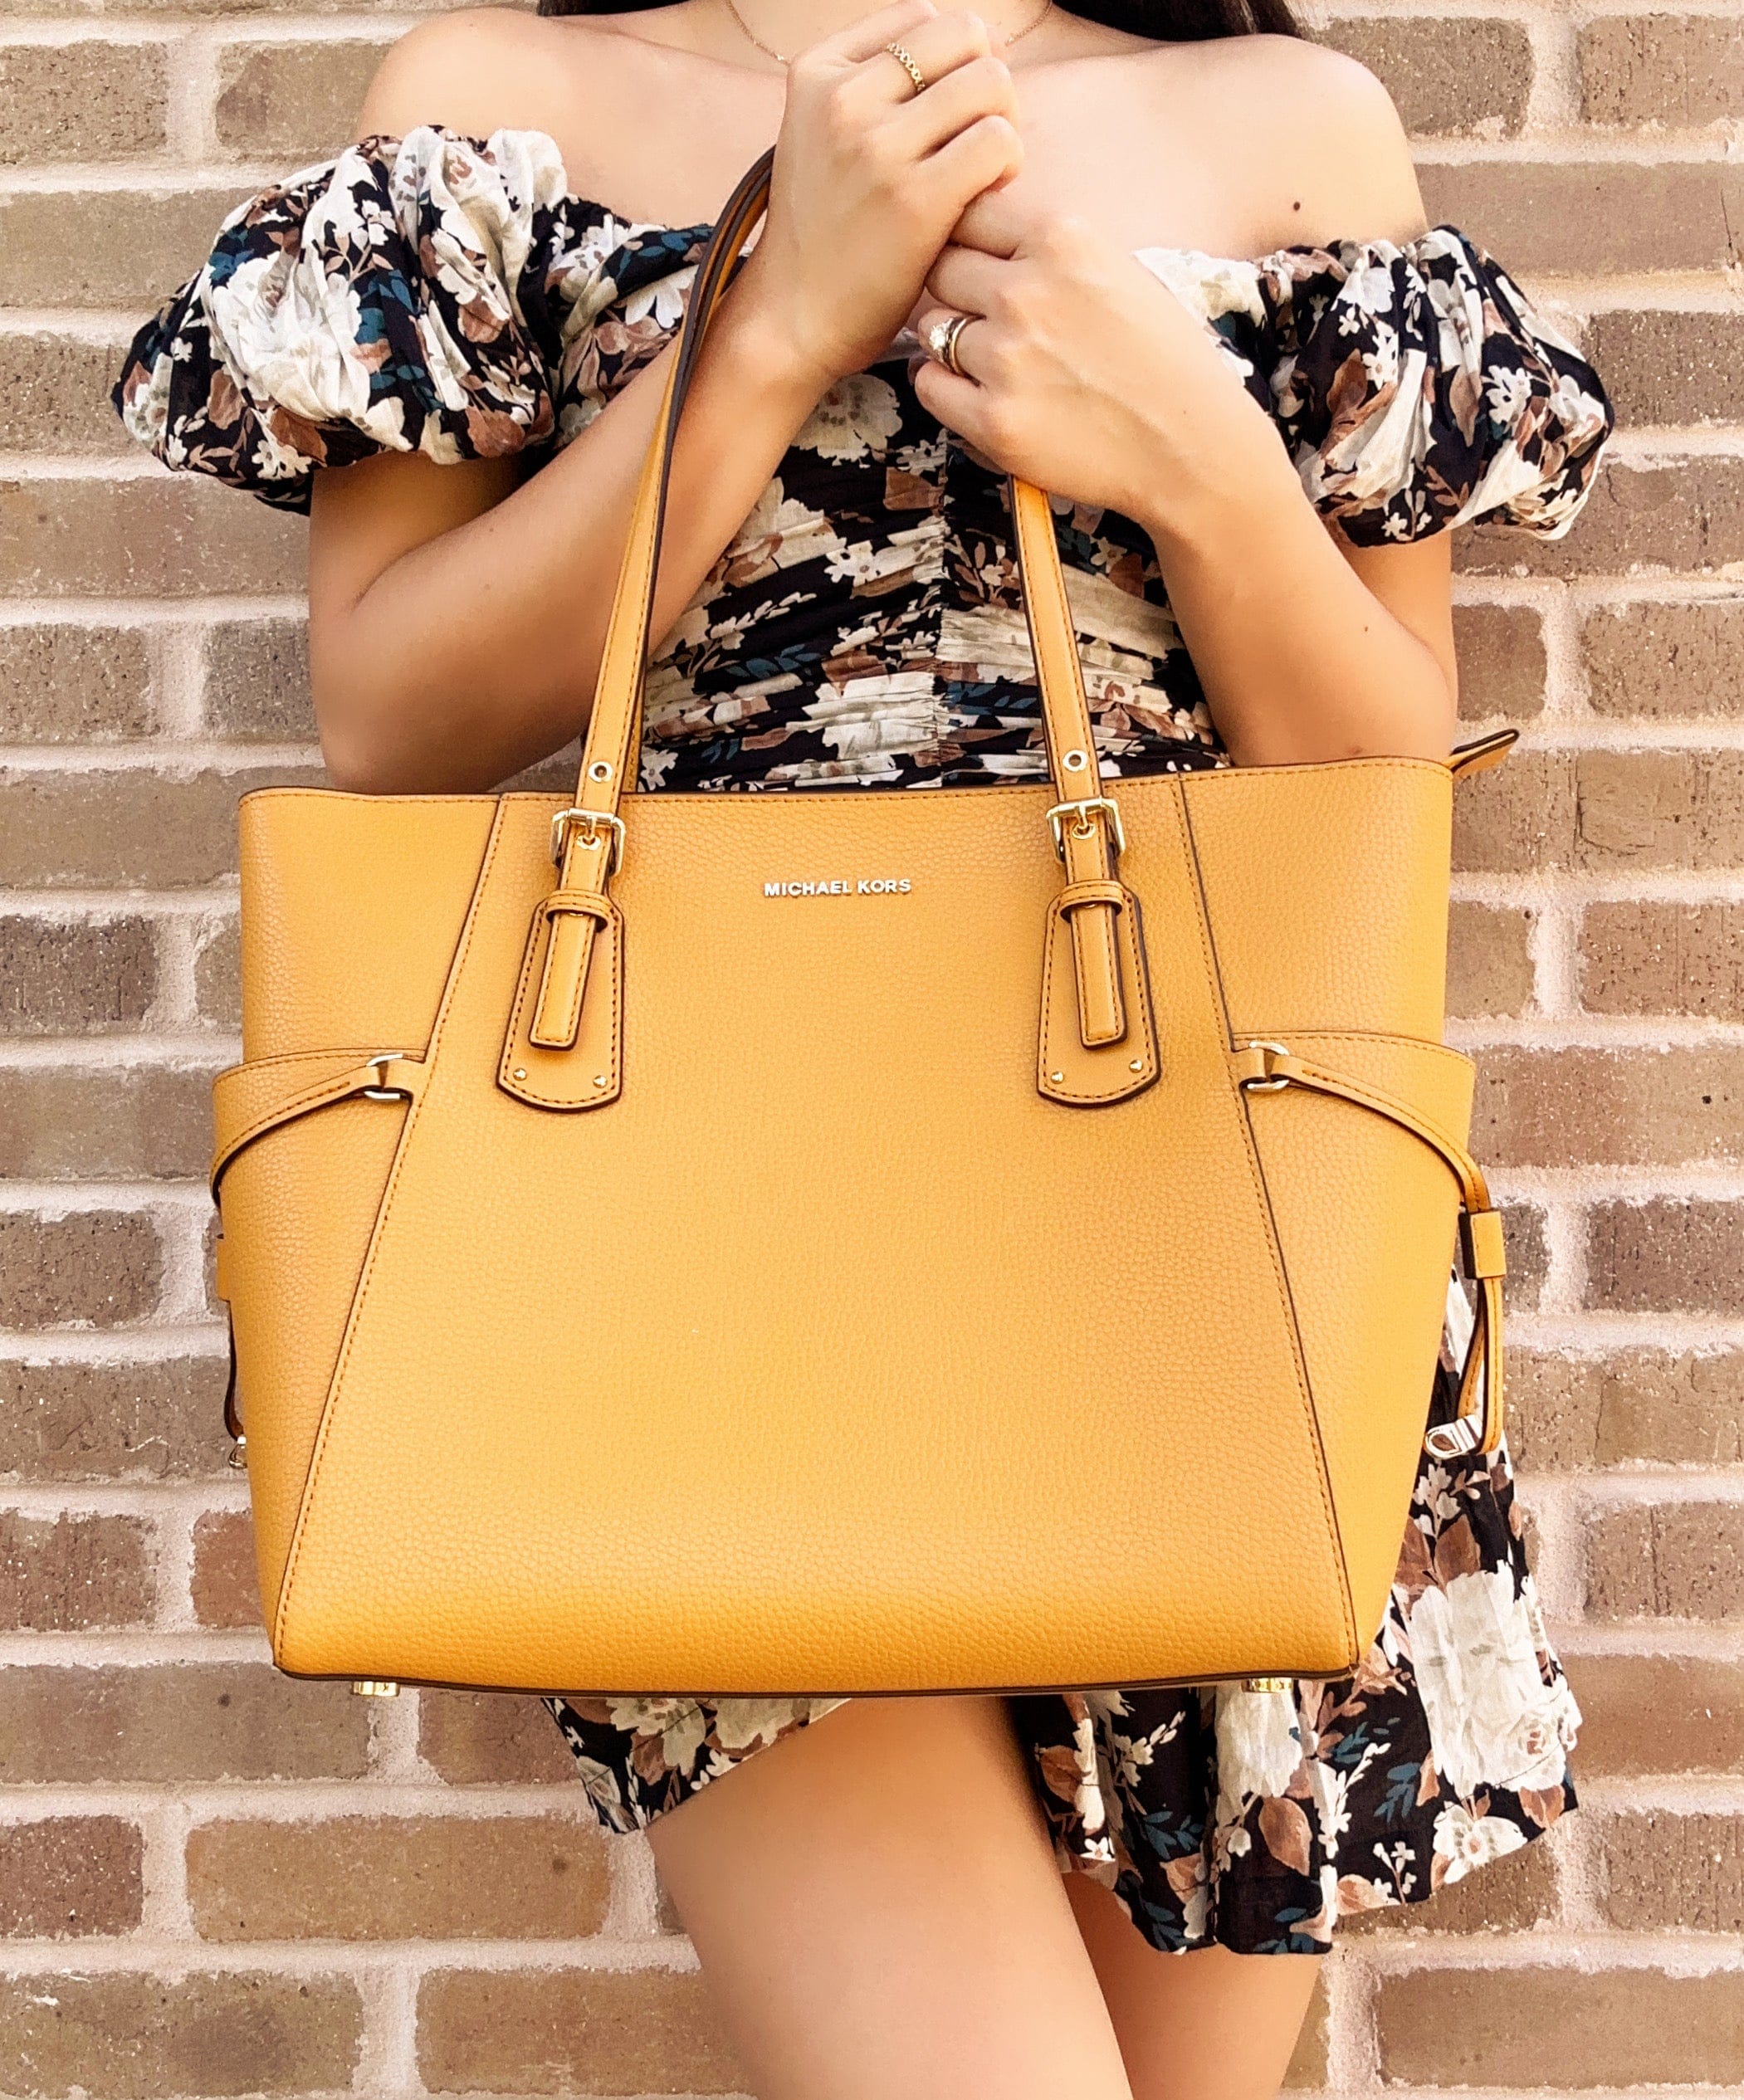 Designer leather bags: Michael Kors, Coach, Kate Spade and Tory